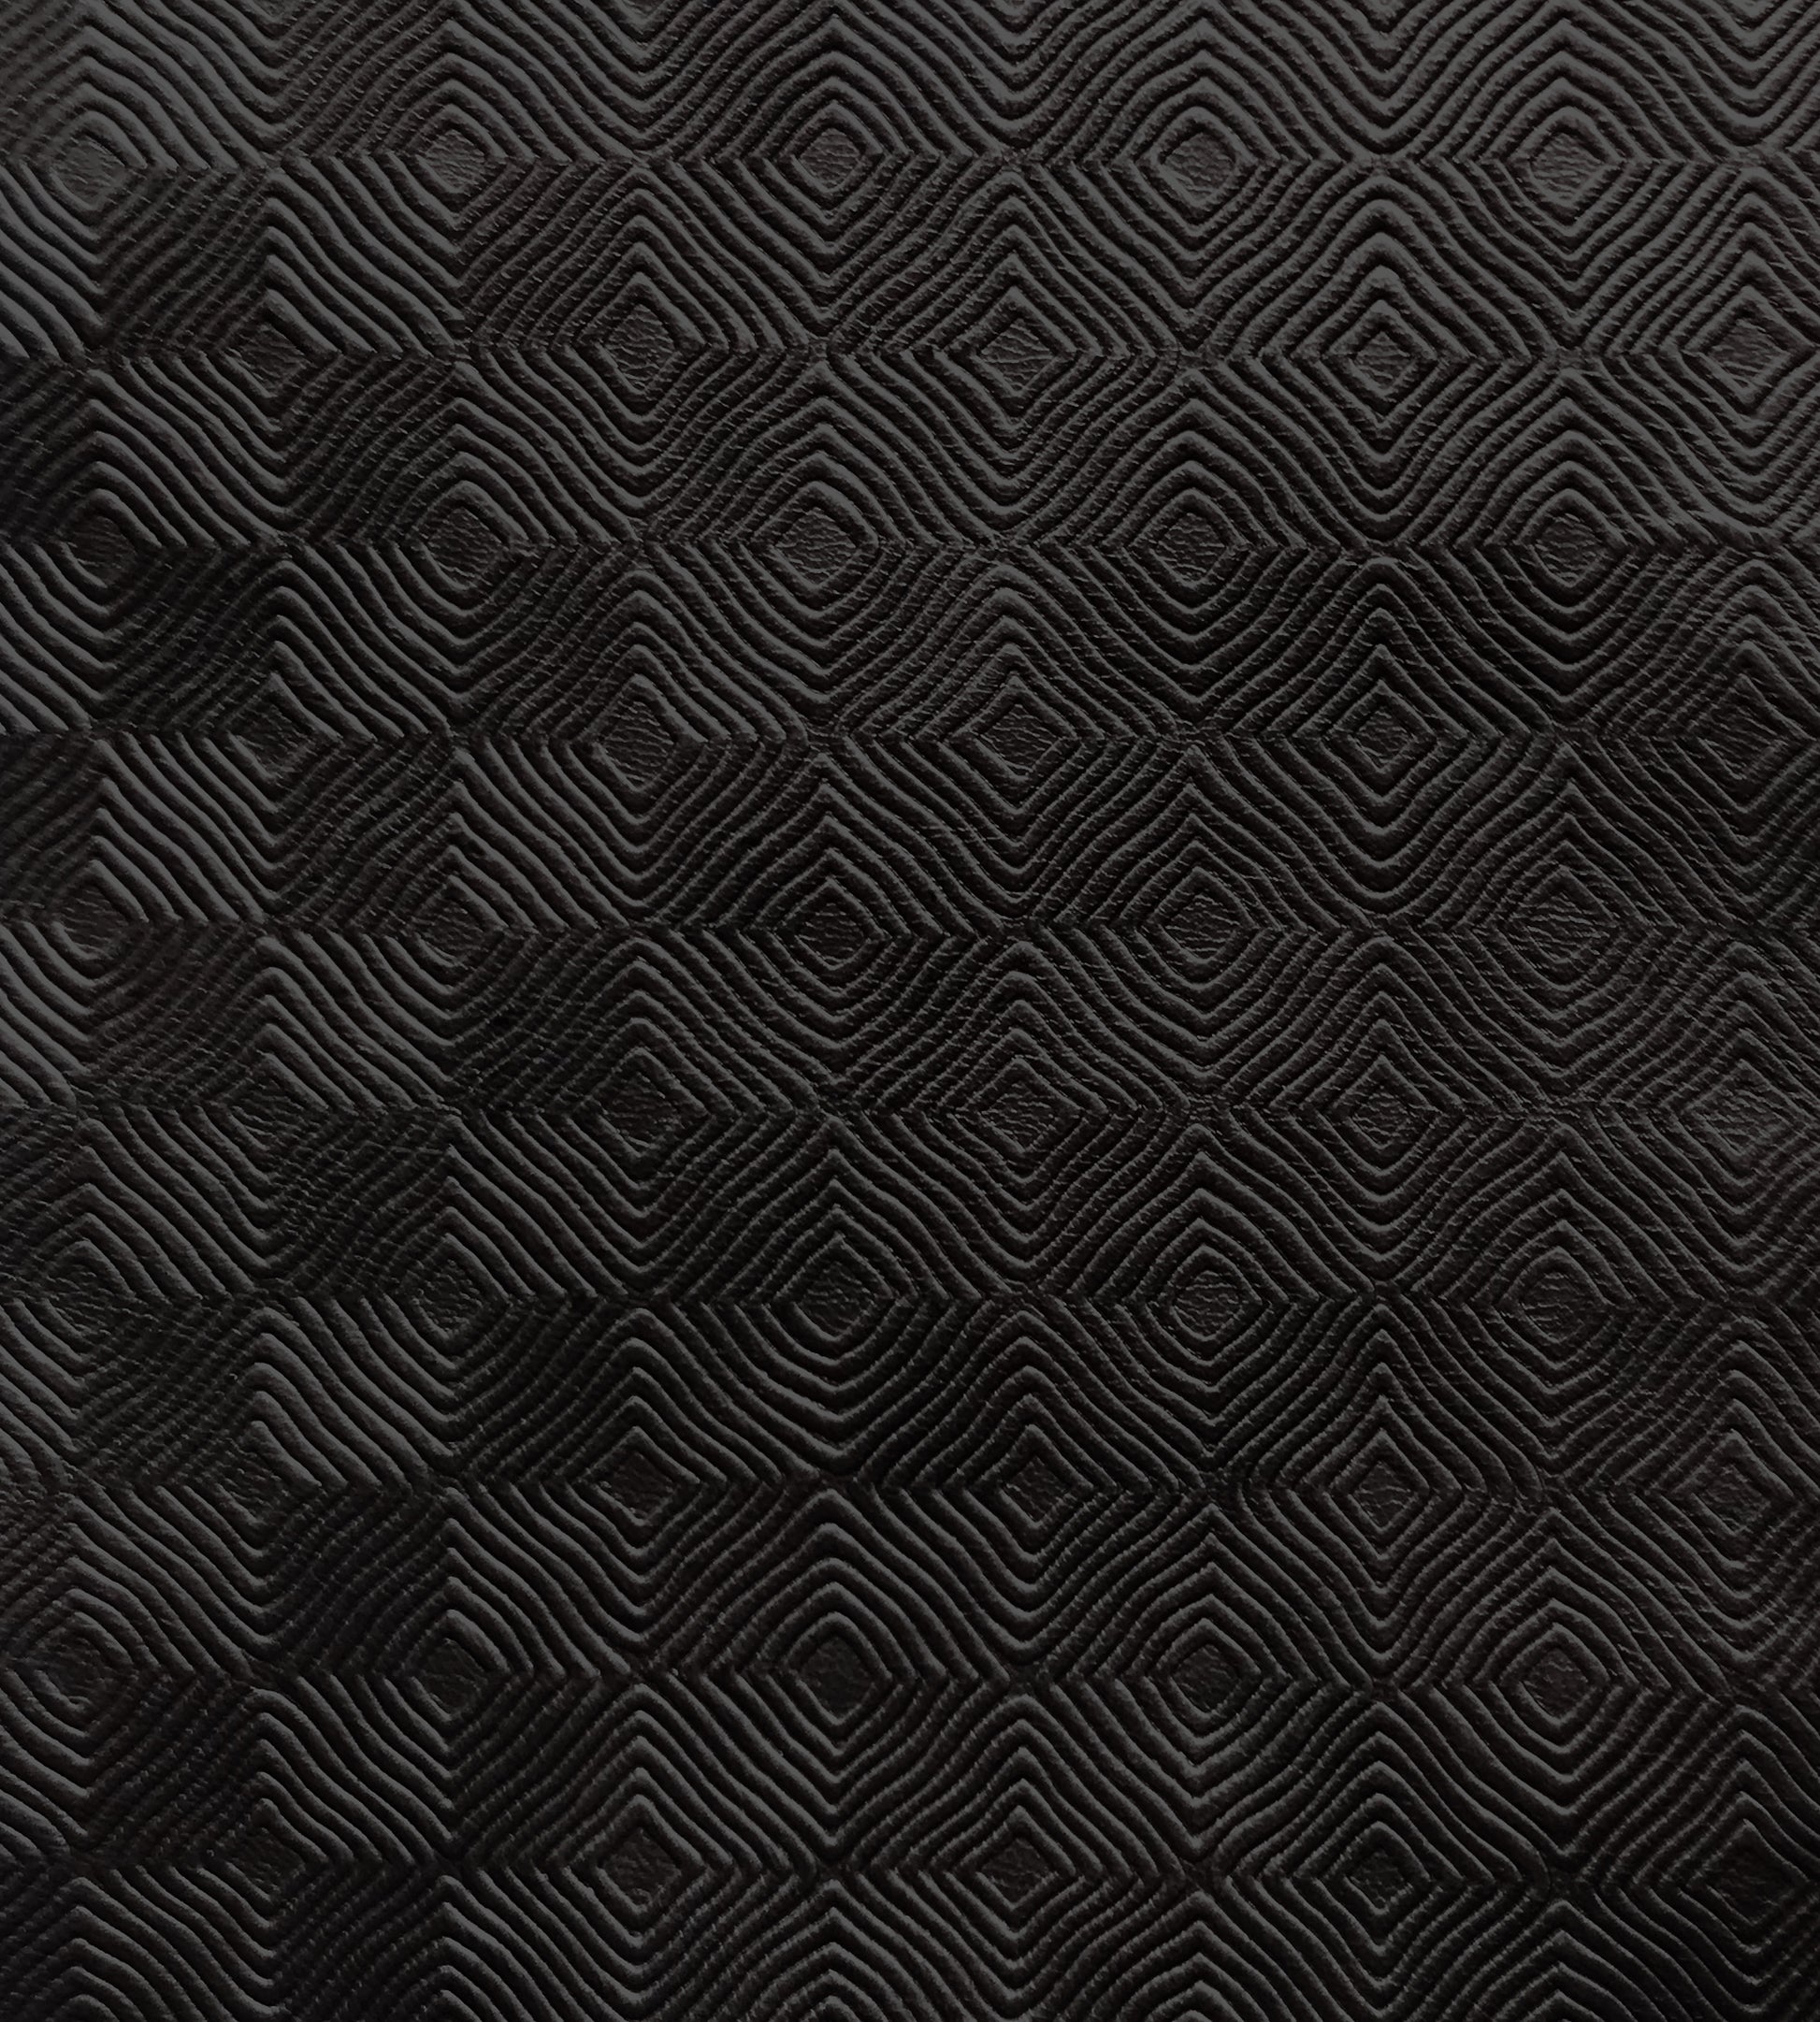 Purchase Old World Weavers Fabric Item AQ 00030073, Cuir Mosaique Black 1